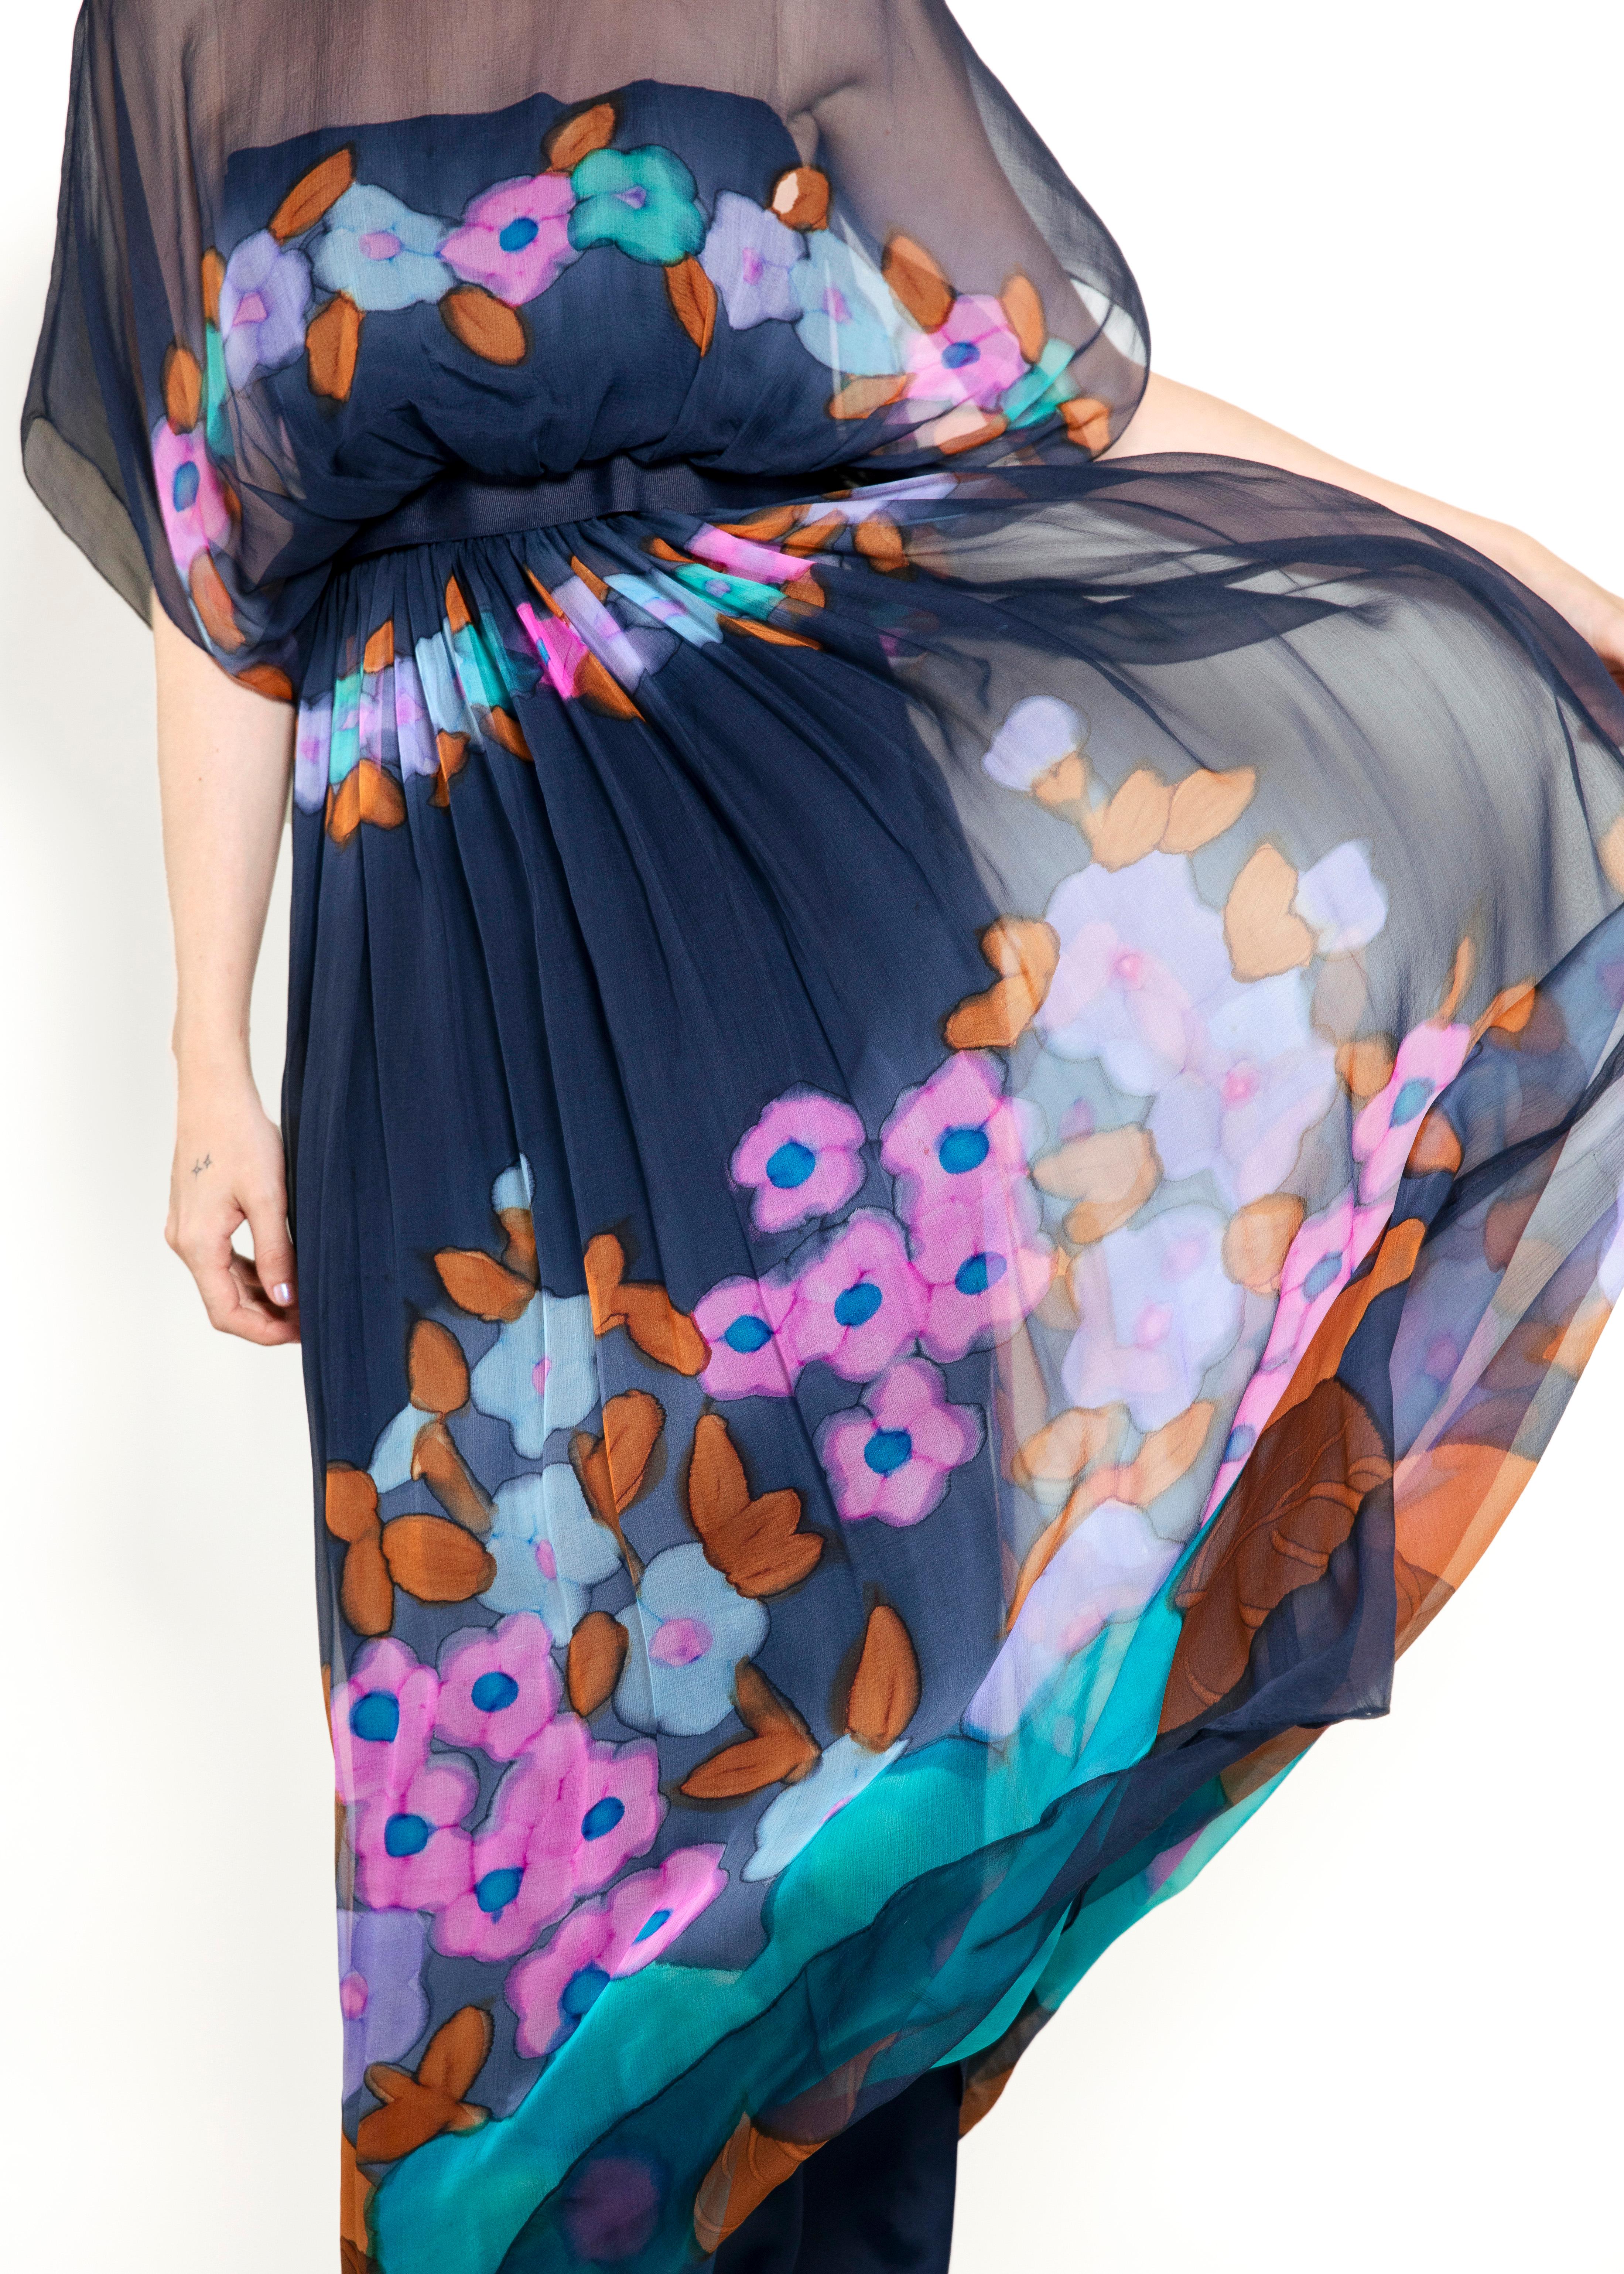 Elevate your wardrobe with this Alfred Bosand Silk Floral Print Maxi Dress. Featuring an elegant floral print and ribbon waist, it is perfect for any occasion. Fully lined and versatile, this dress is sure to become a wardrobe favorite.

